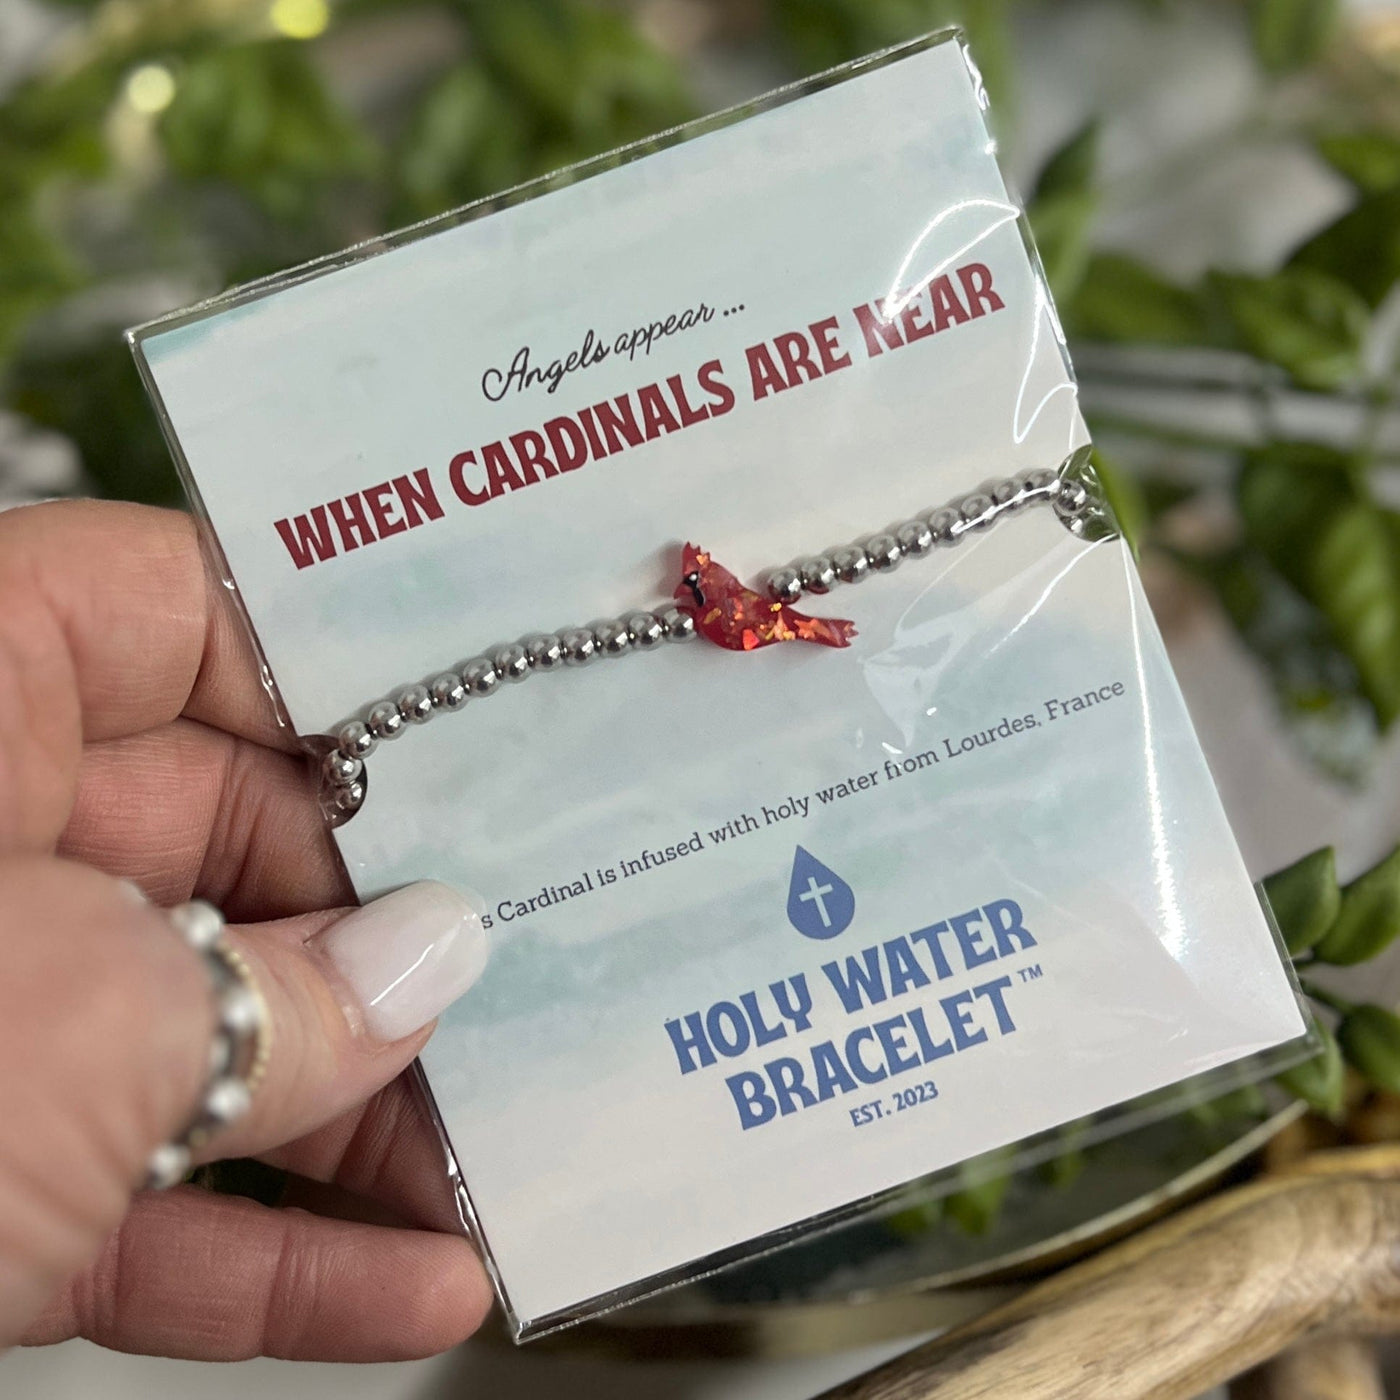 Holy Water Cardinal Bracelet Shabby Chic Boutique and Tanning Salon Silver